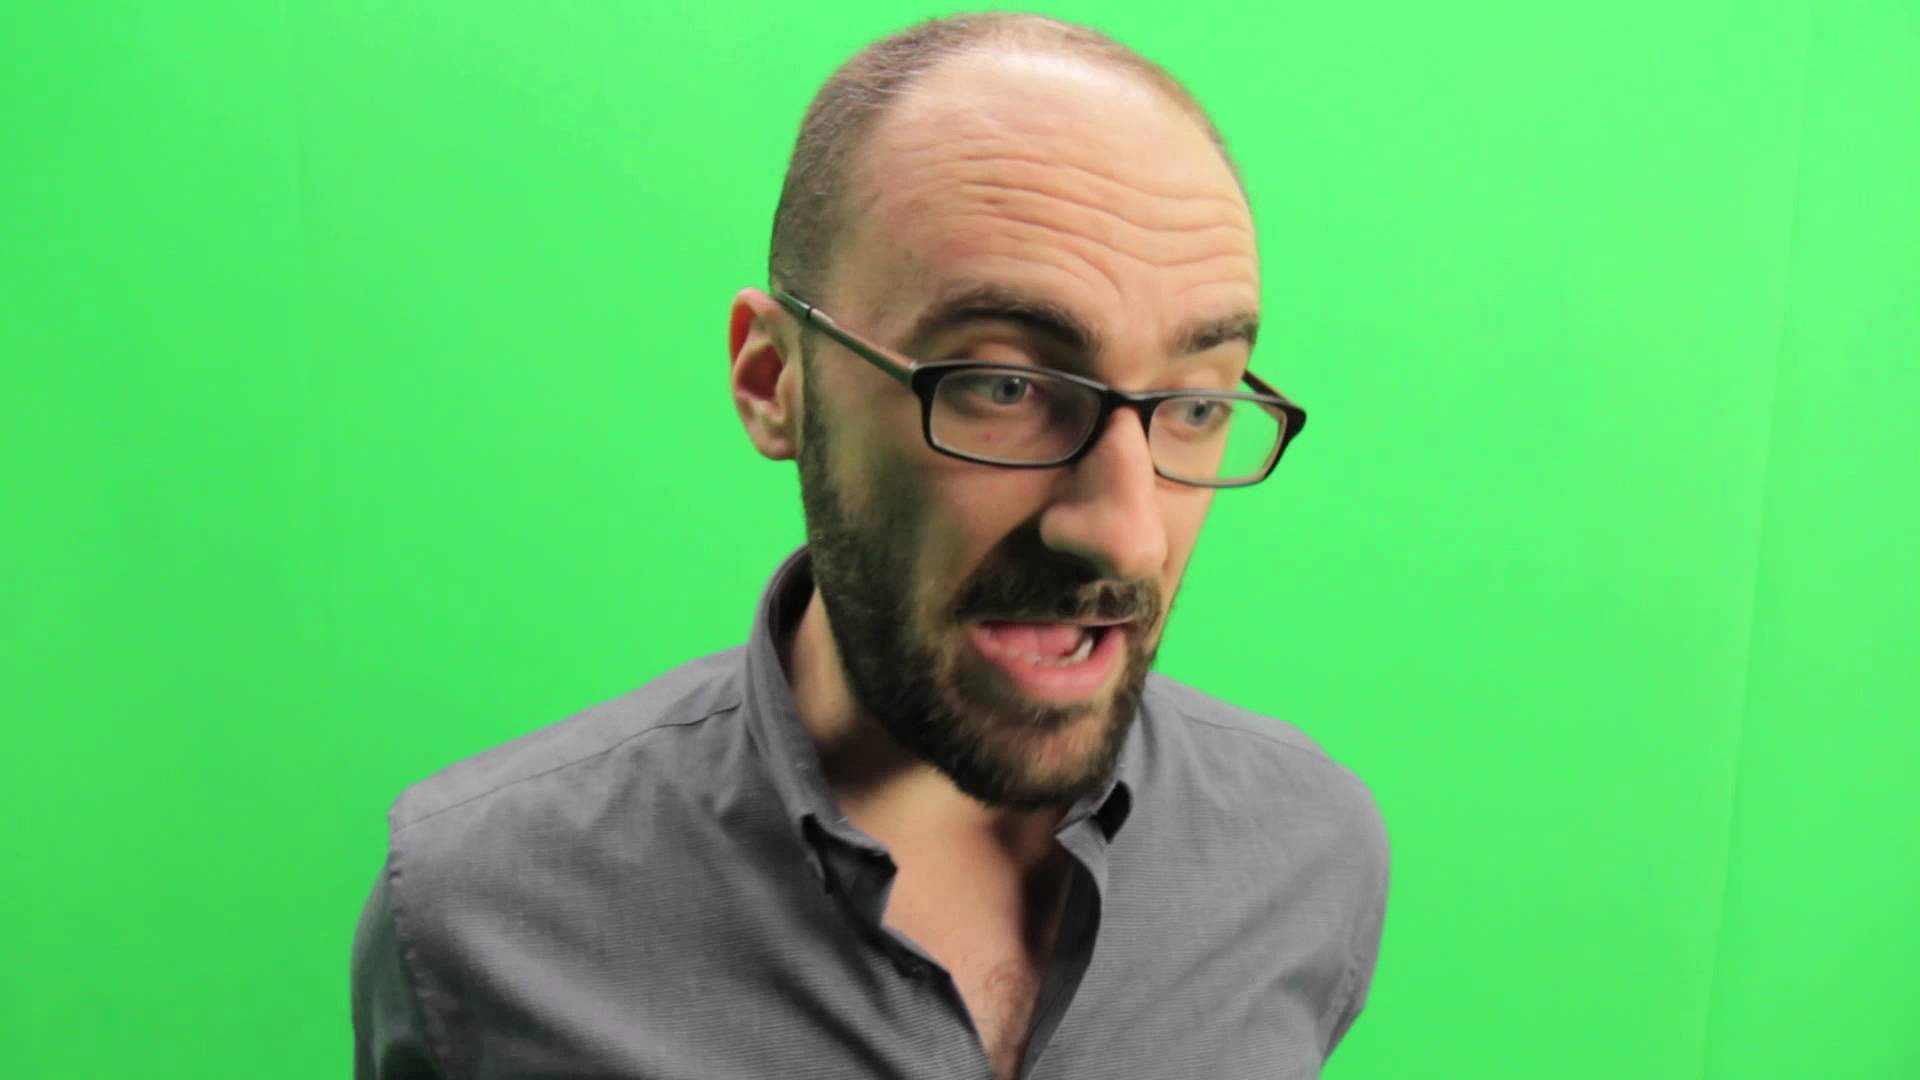 What If You Were Born in Space? by Vsauce